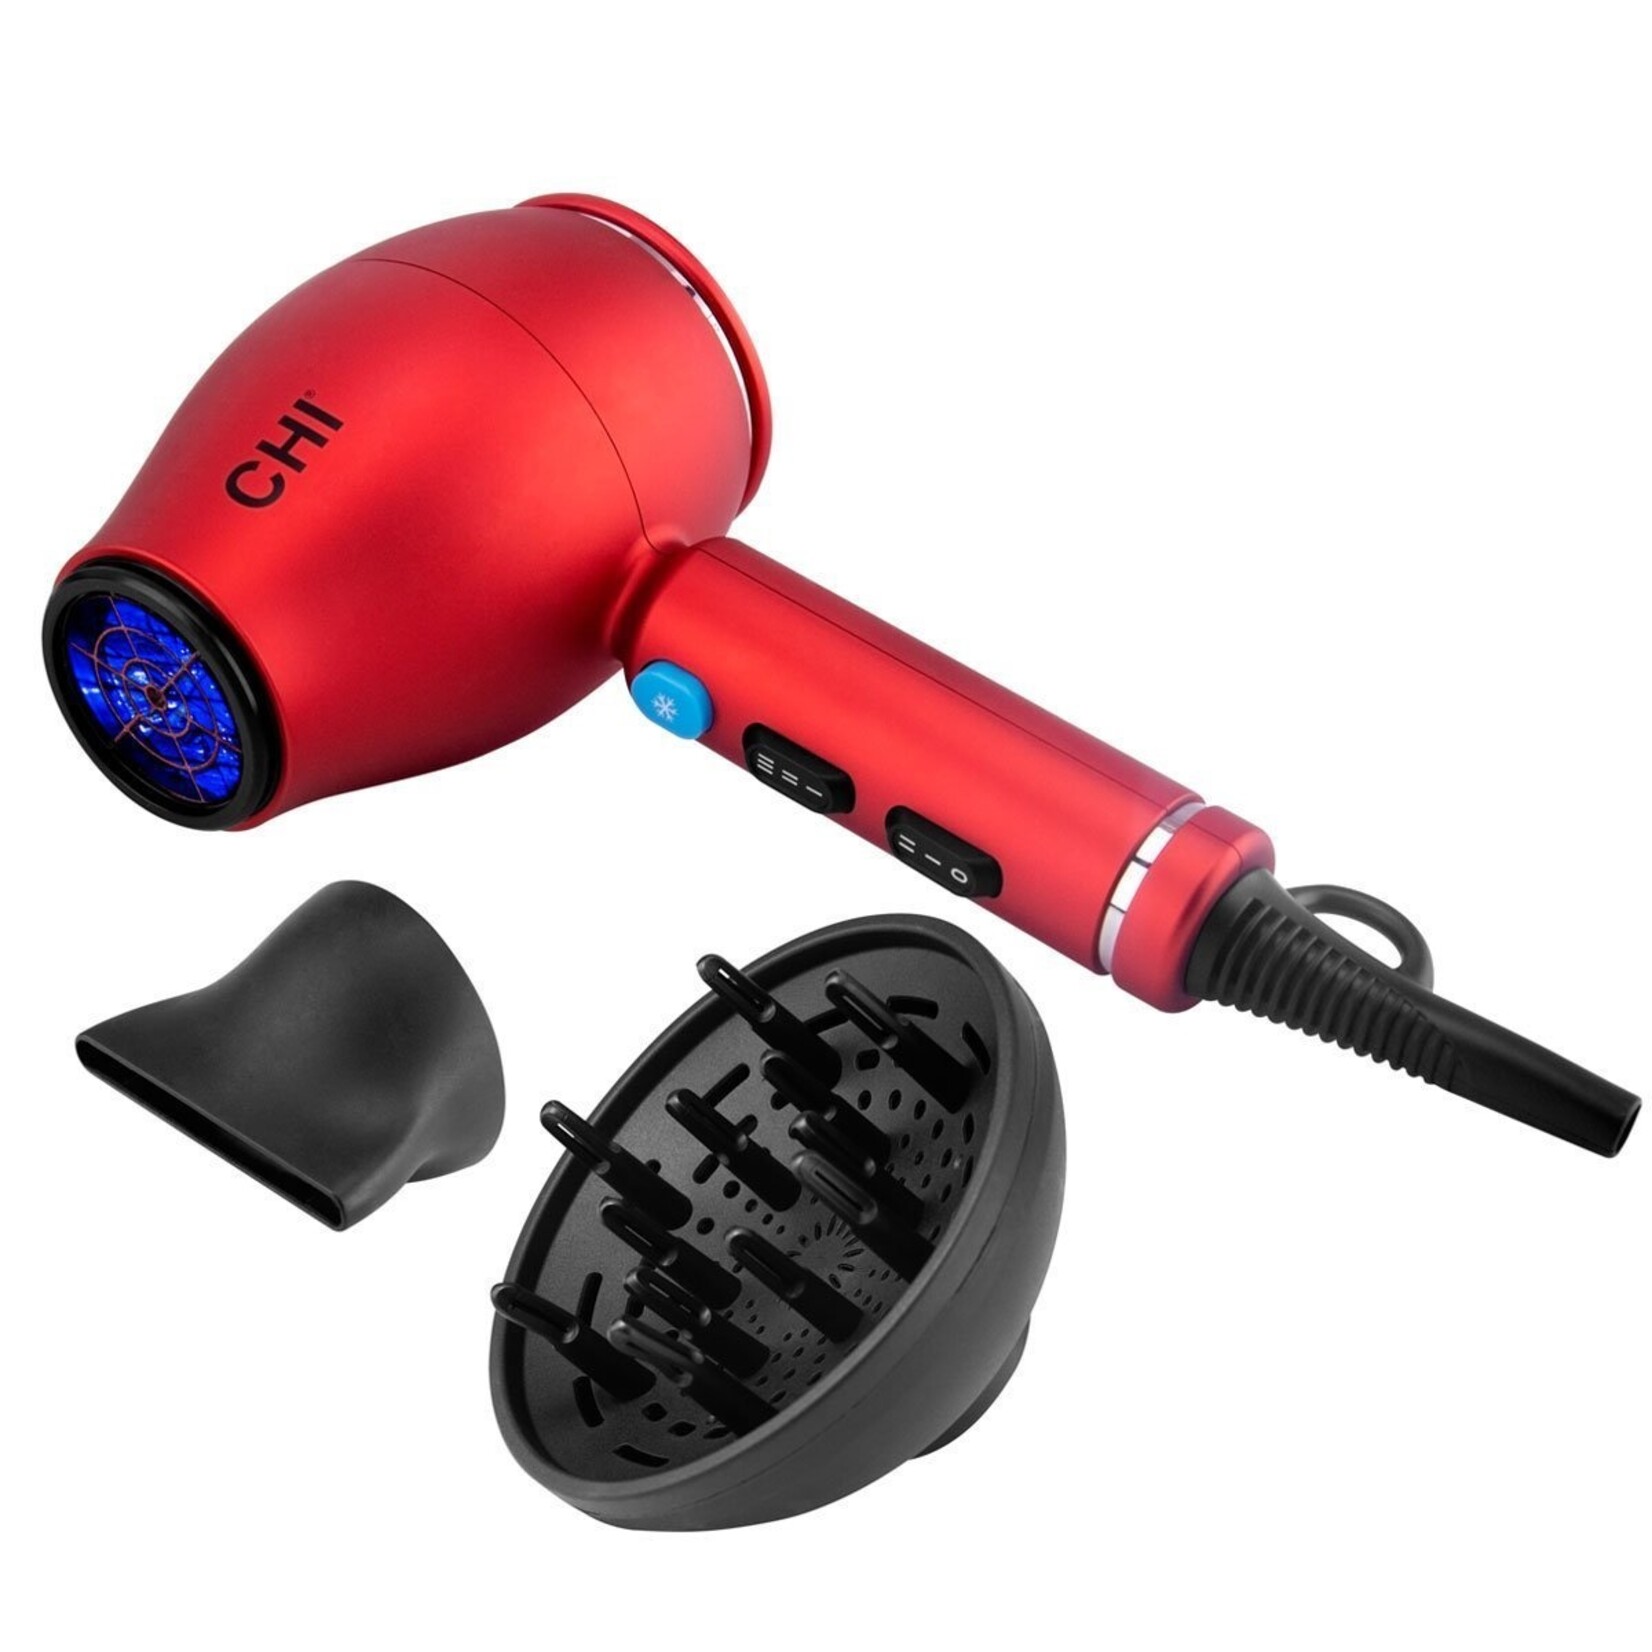 Chi CHI - Advanced ionic hairdryer